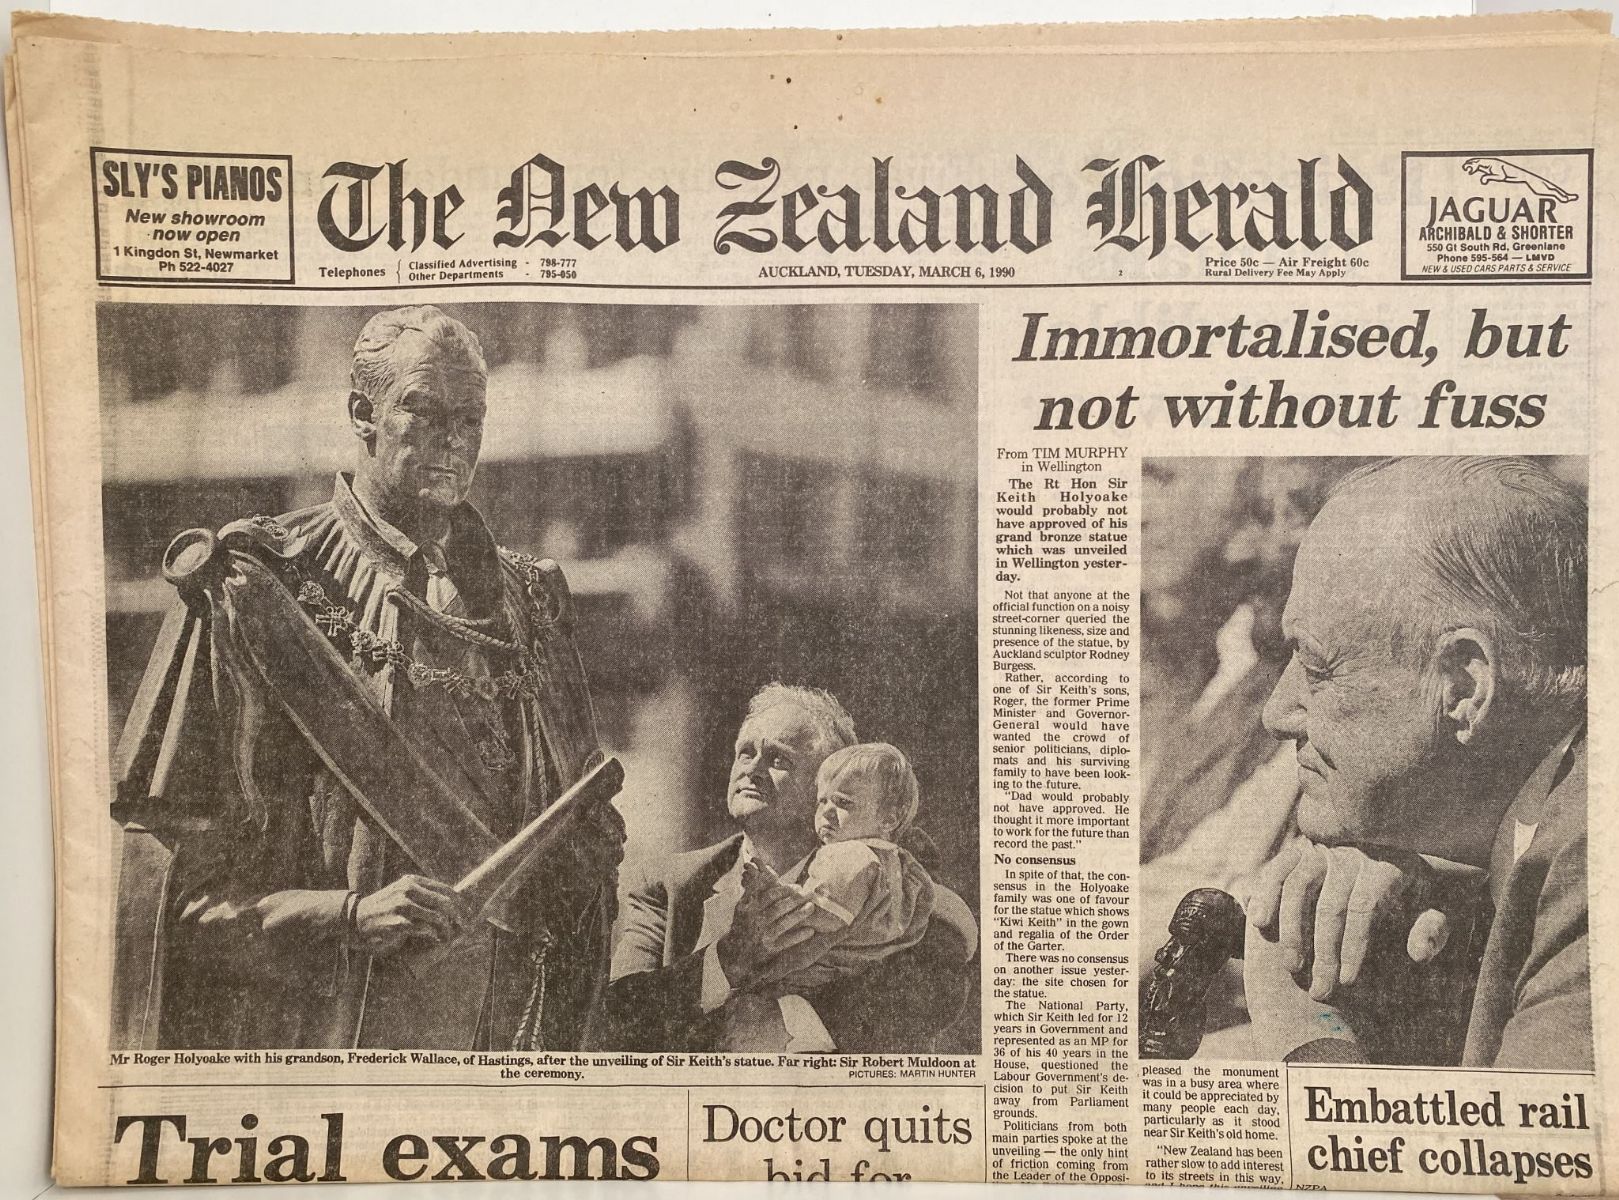 OLD NEWSPAPER: The New Zealand Herald - 6th March 1990